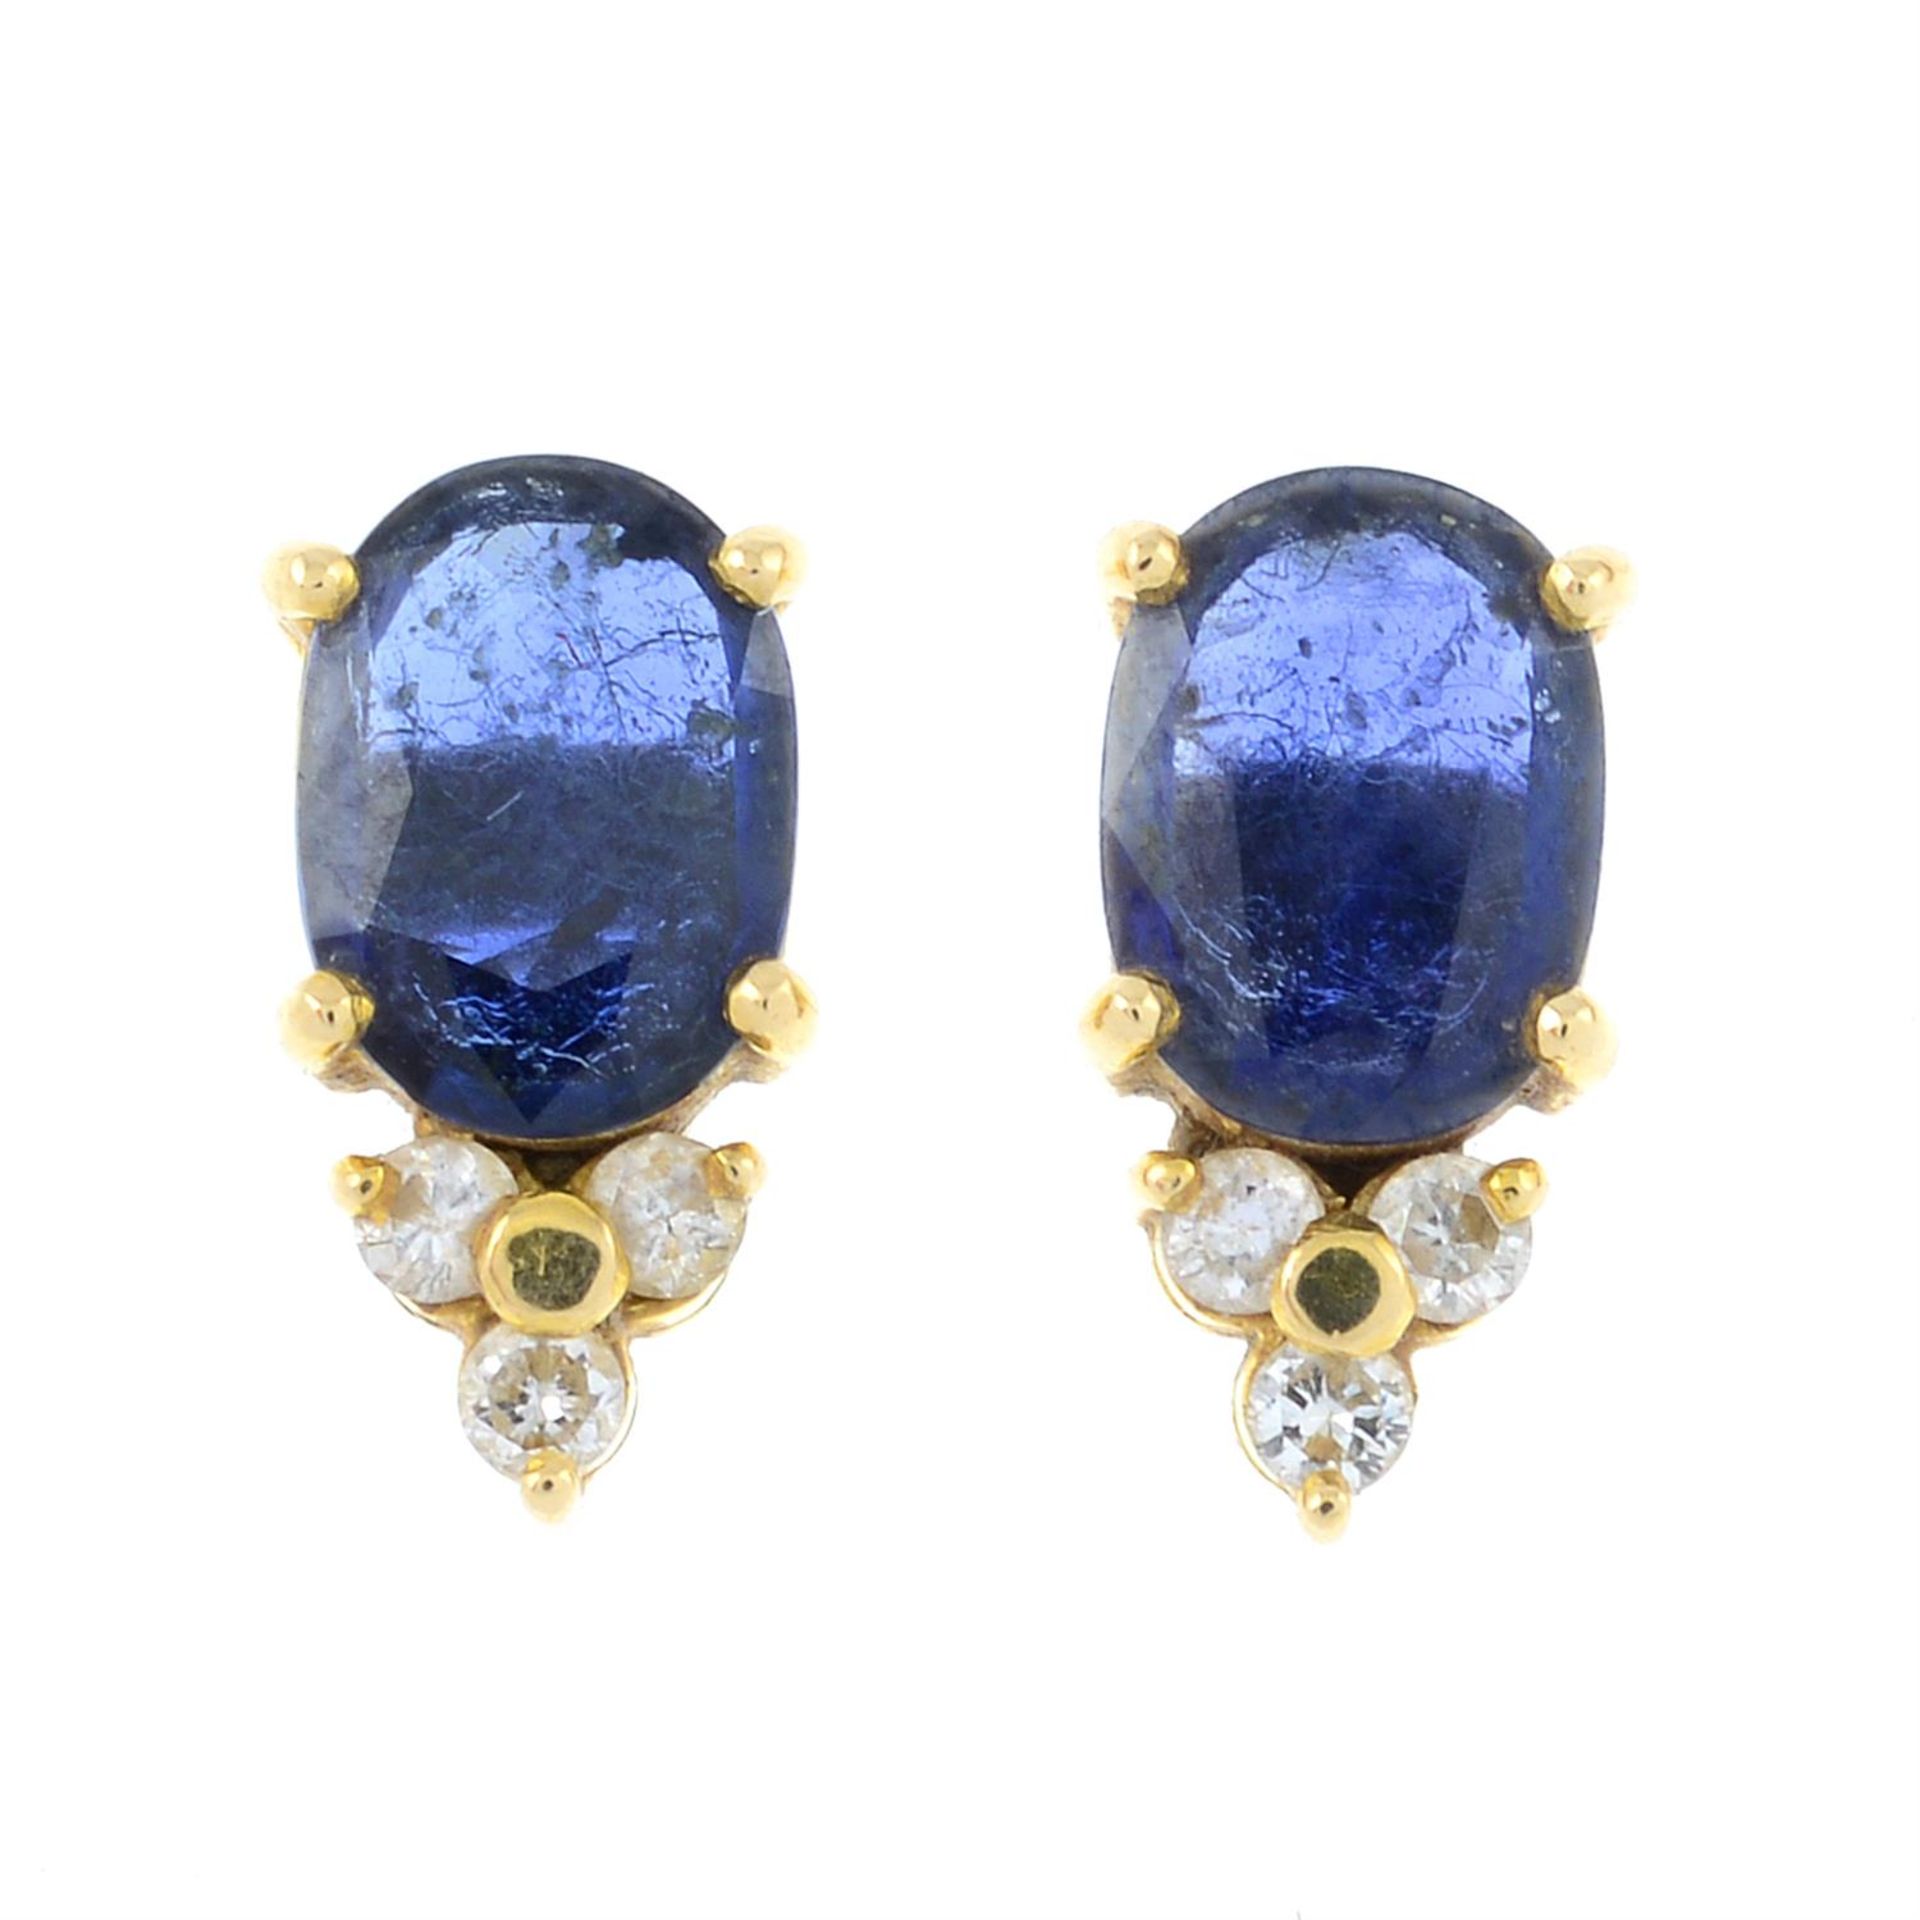 A pair of sapphire and brilliant-cut diamond stud earrings.